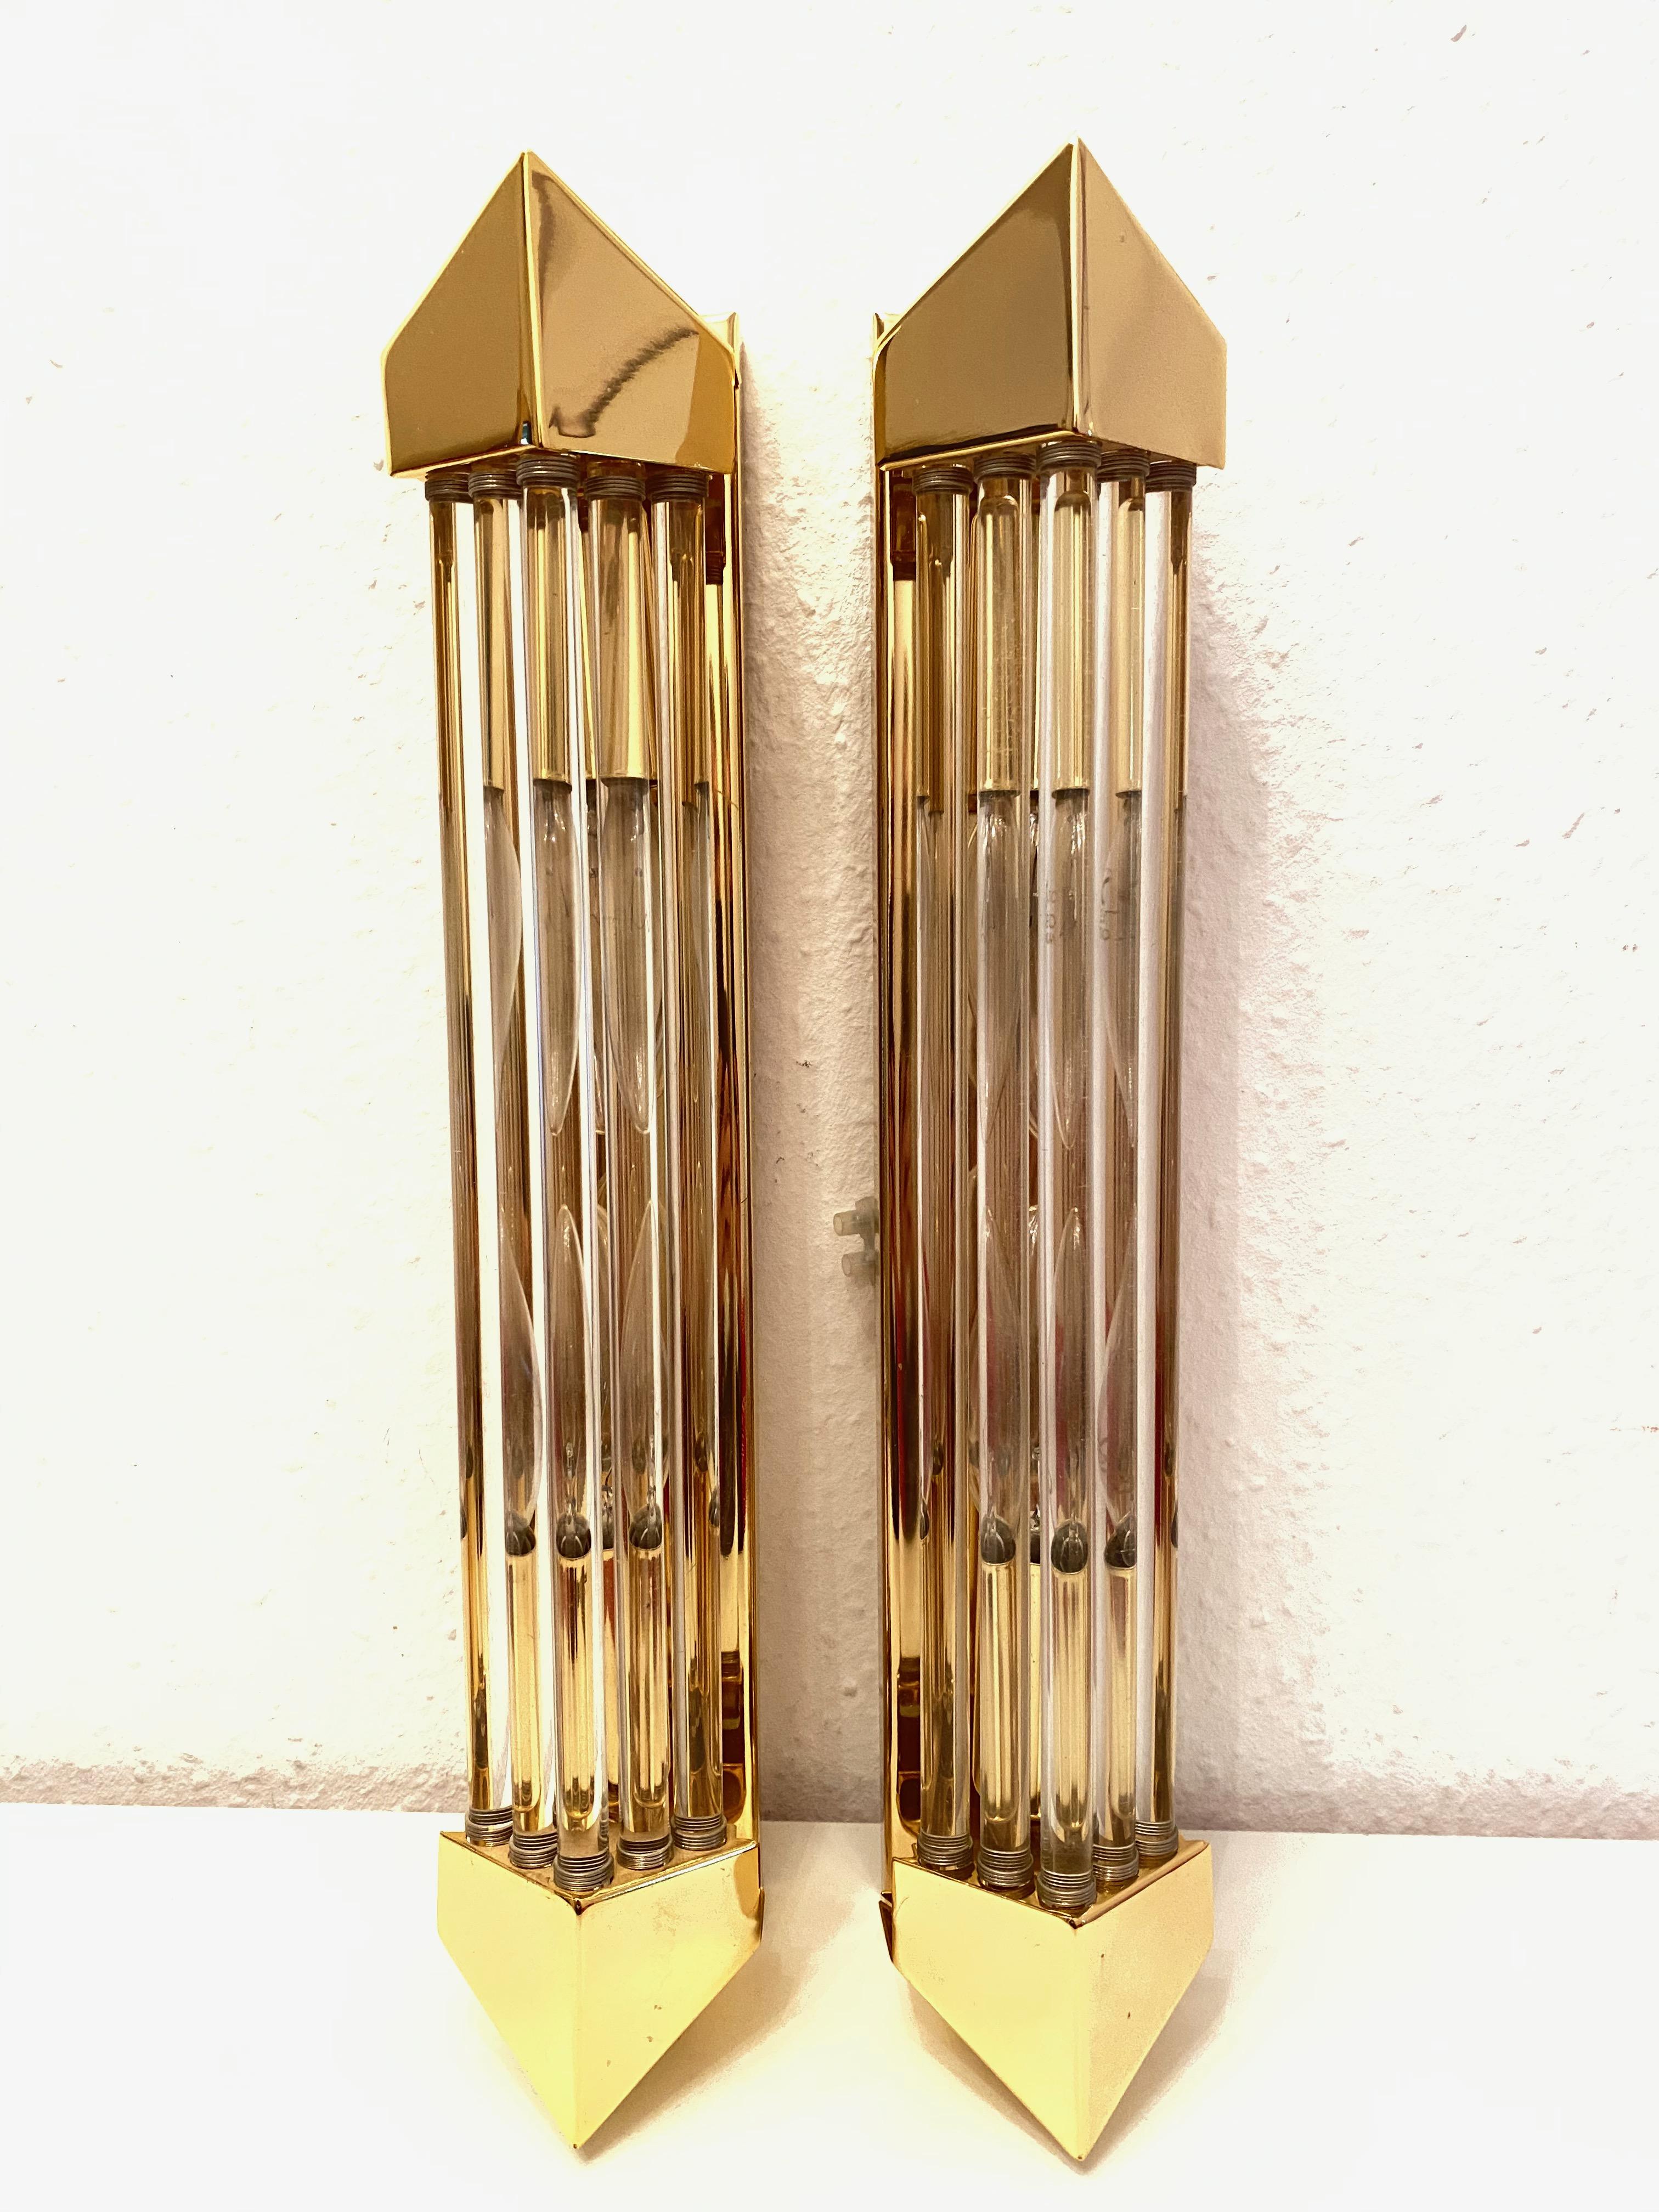 A stunning pair of rod wall sconces made by Honsel Leuchten, Germany. Each with angled brass ends and a single brass wall plate with two sockets and mount make for a beautiful wall light. Easy to mount and fantastic to look at. Each fixture requires